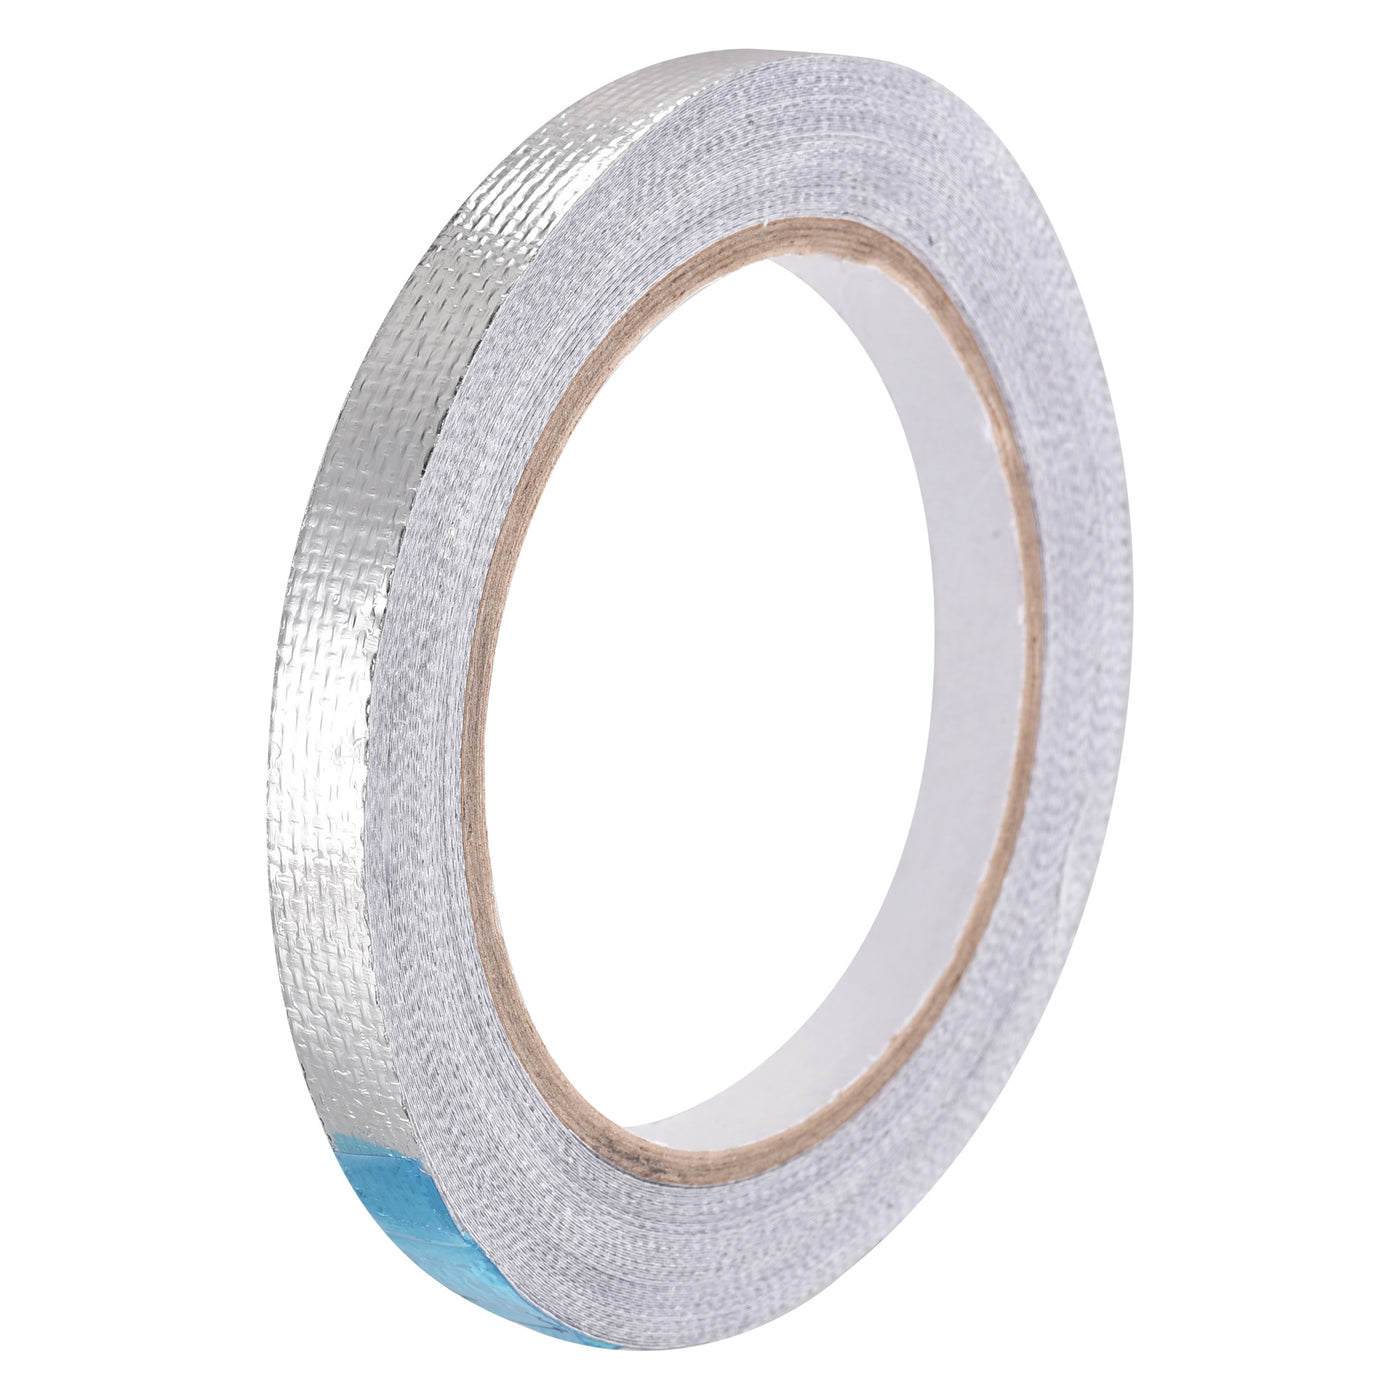 uxcell Uxcell Aluminum Foil Tape High-Temperature Tape for HVAC,Sealing 10mmx20m/65ft